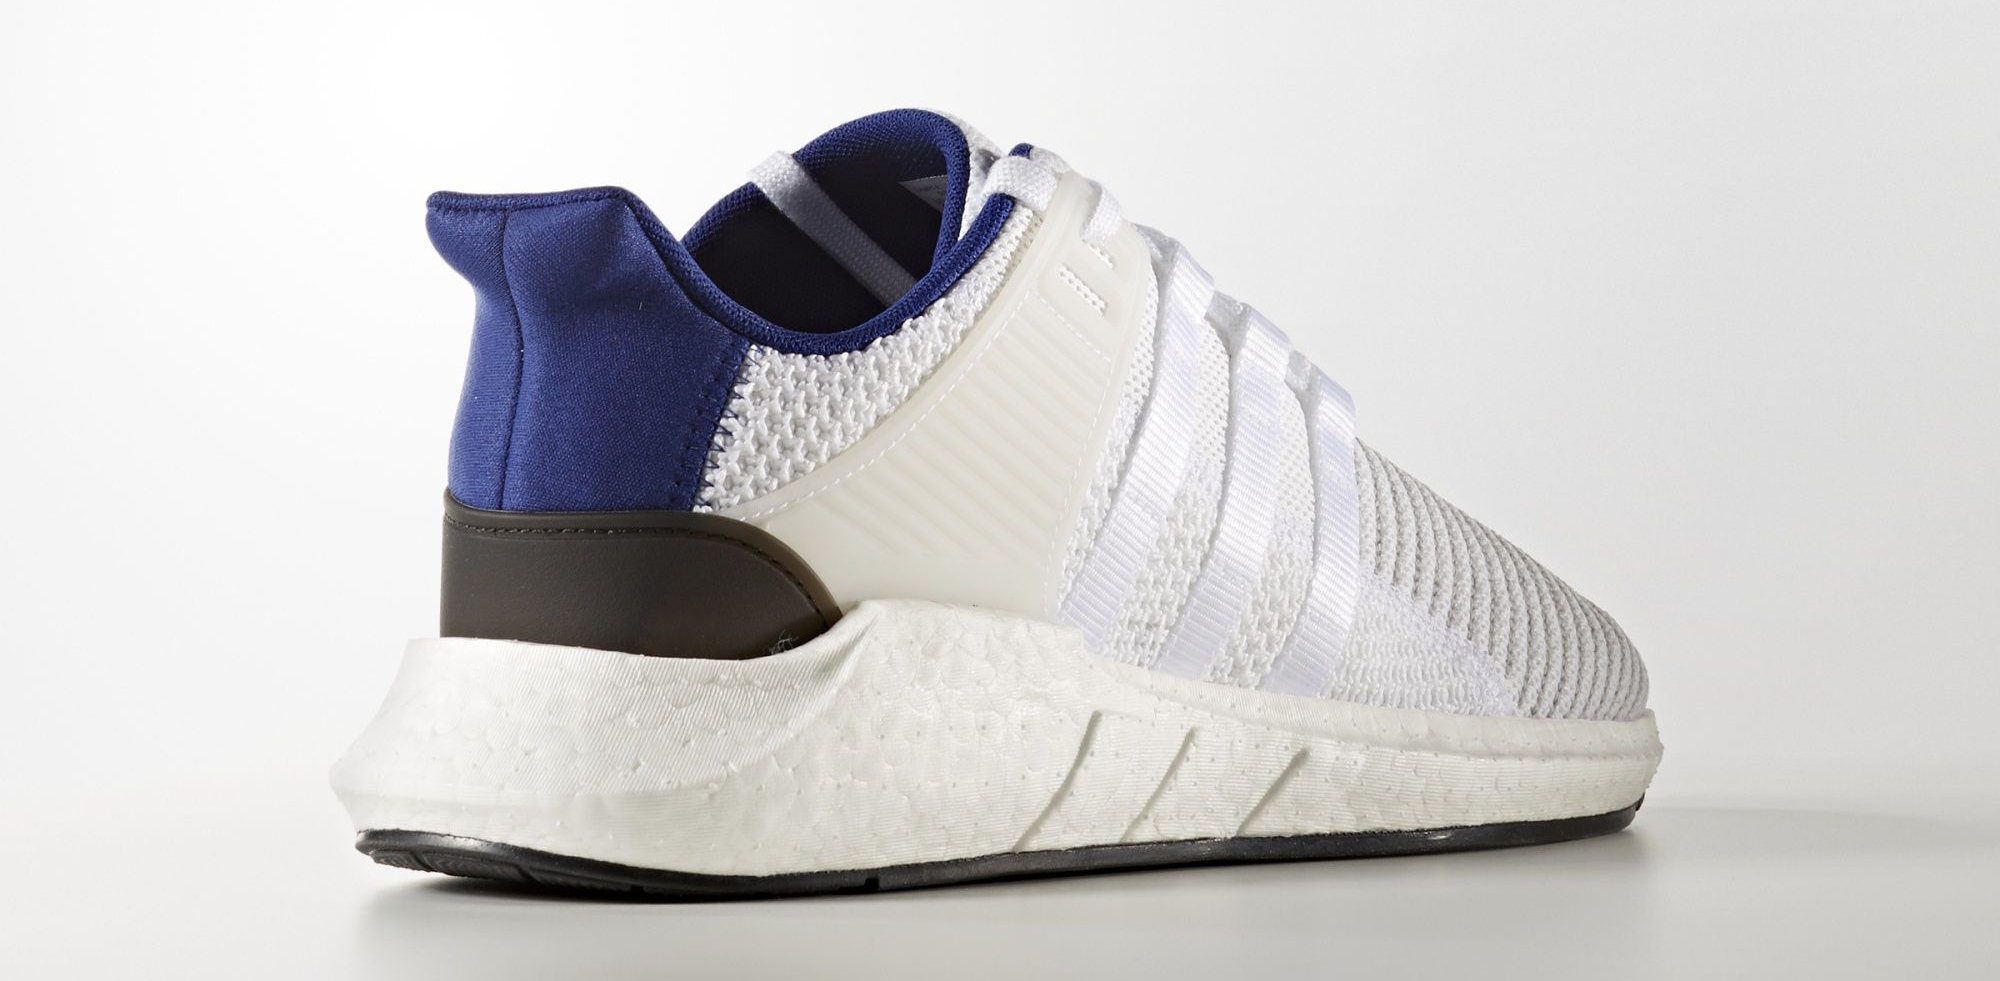 adidas-eqt-support-9317-white-royal-1